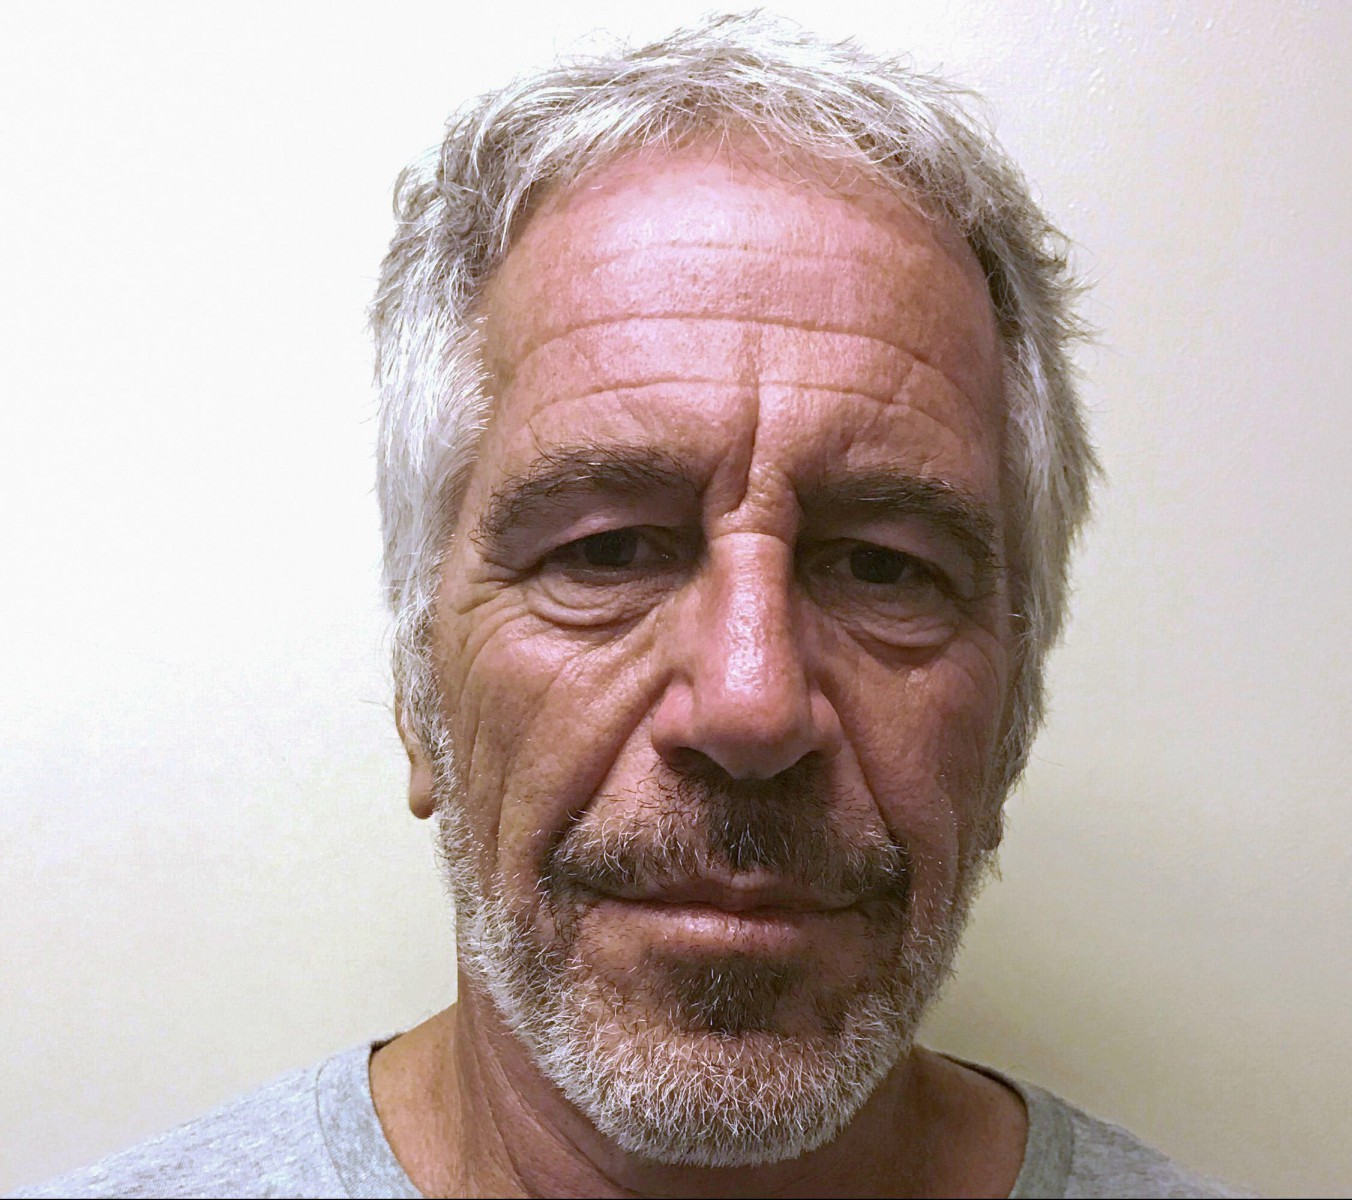 Maxwell has not been seen since Epstein was found dead in his jail cell in August